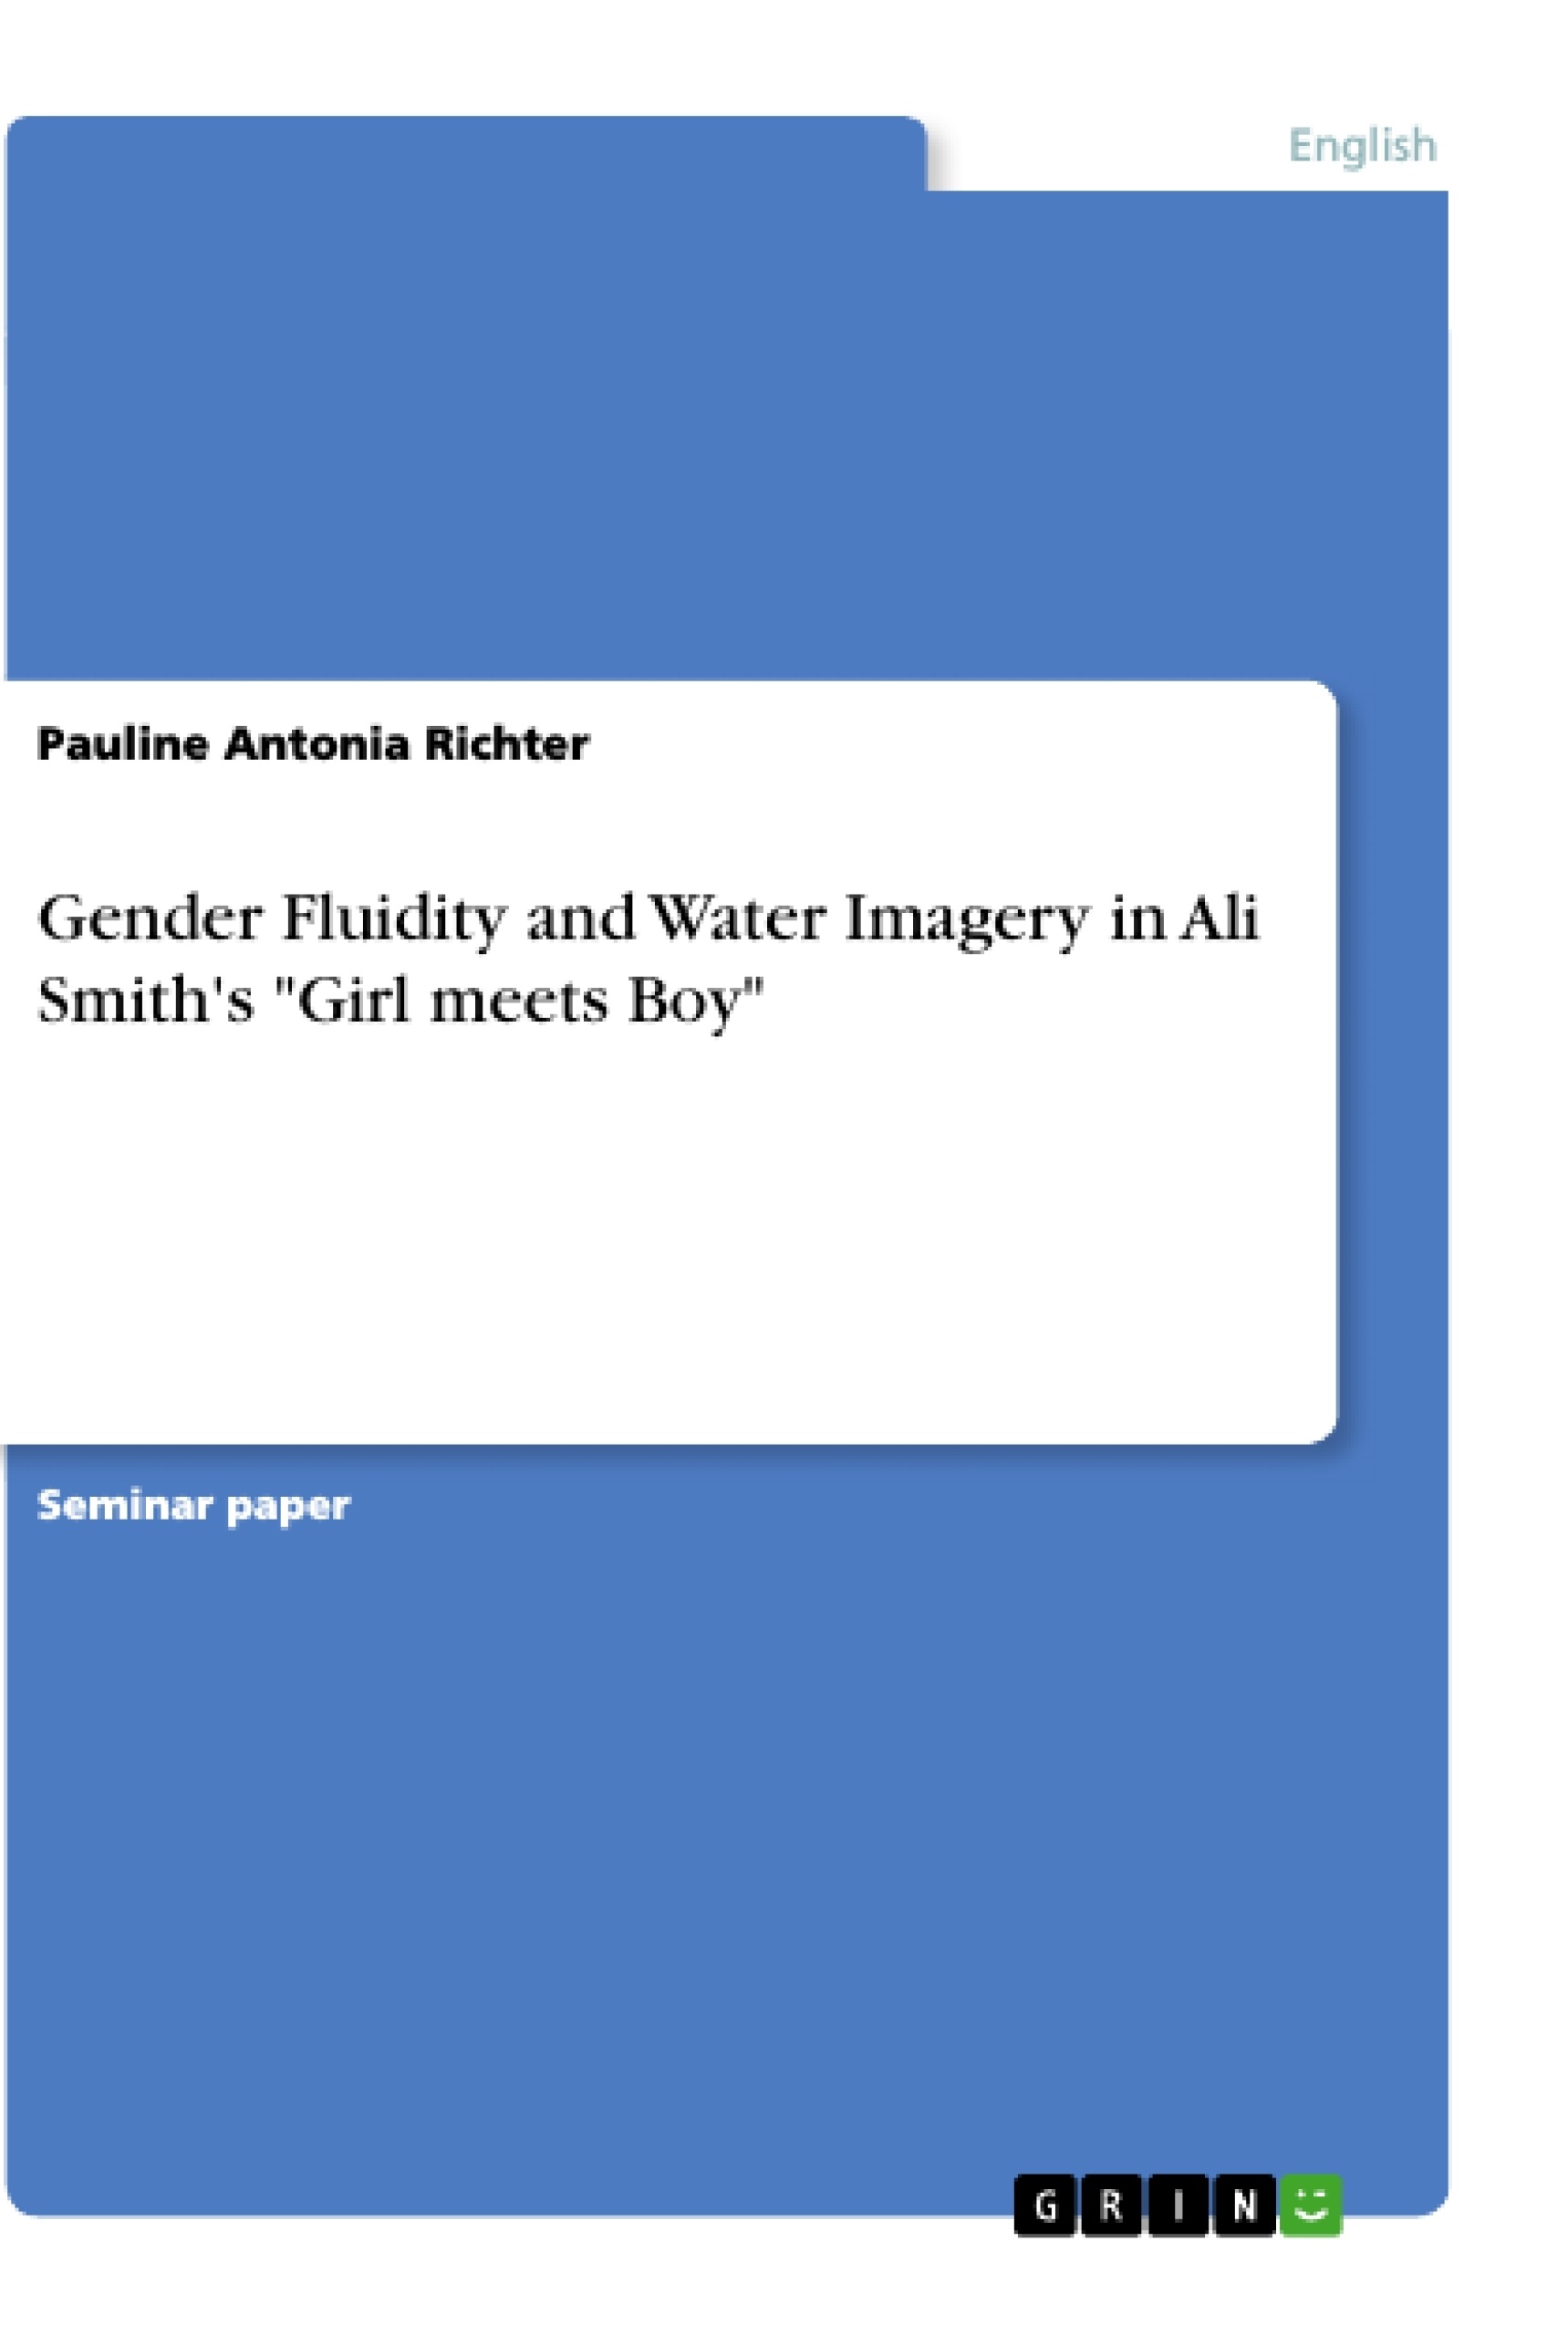 Titre: Gender Fluidity and Water Imagery in Ali Smith's "Girl meets Boy"